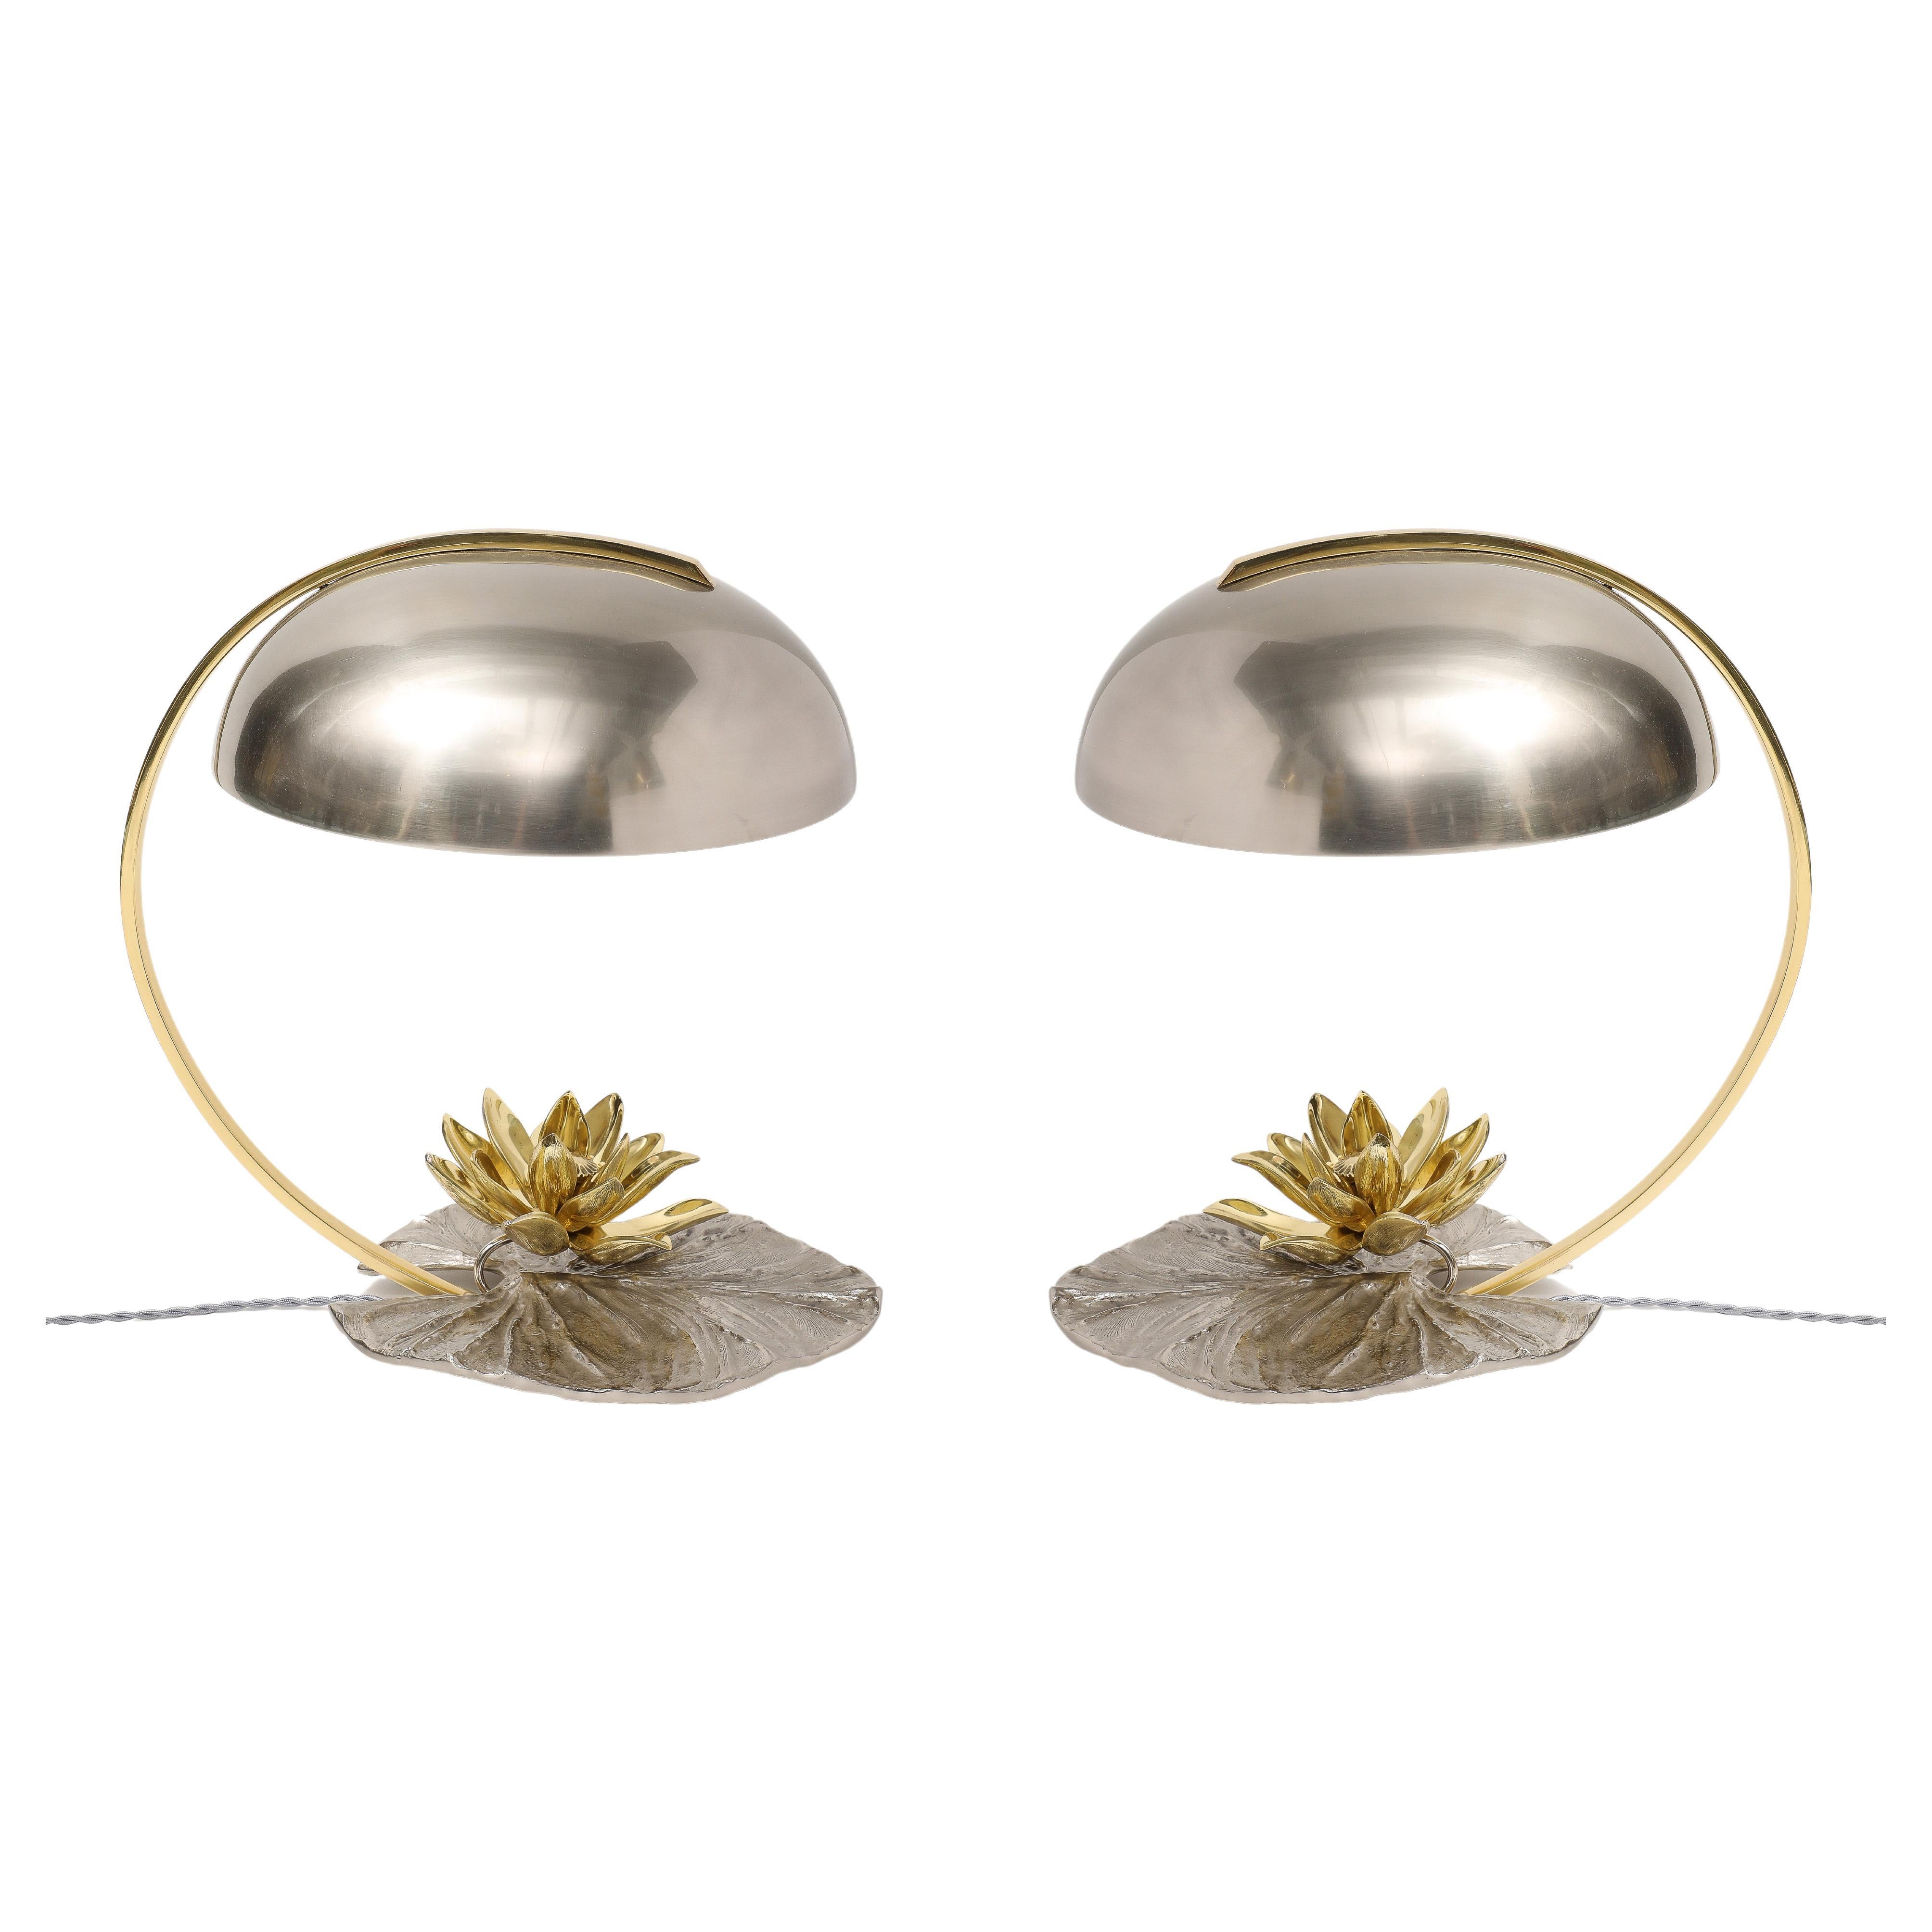 This pair is rare. The lamps were professionally refinished. The contrast between the silvered chrome finish and the gilt gives a magnificent contemporary style.